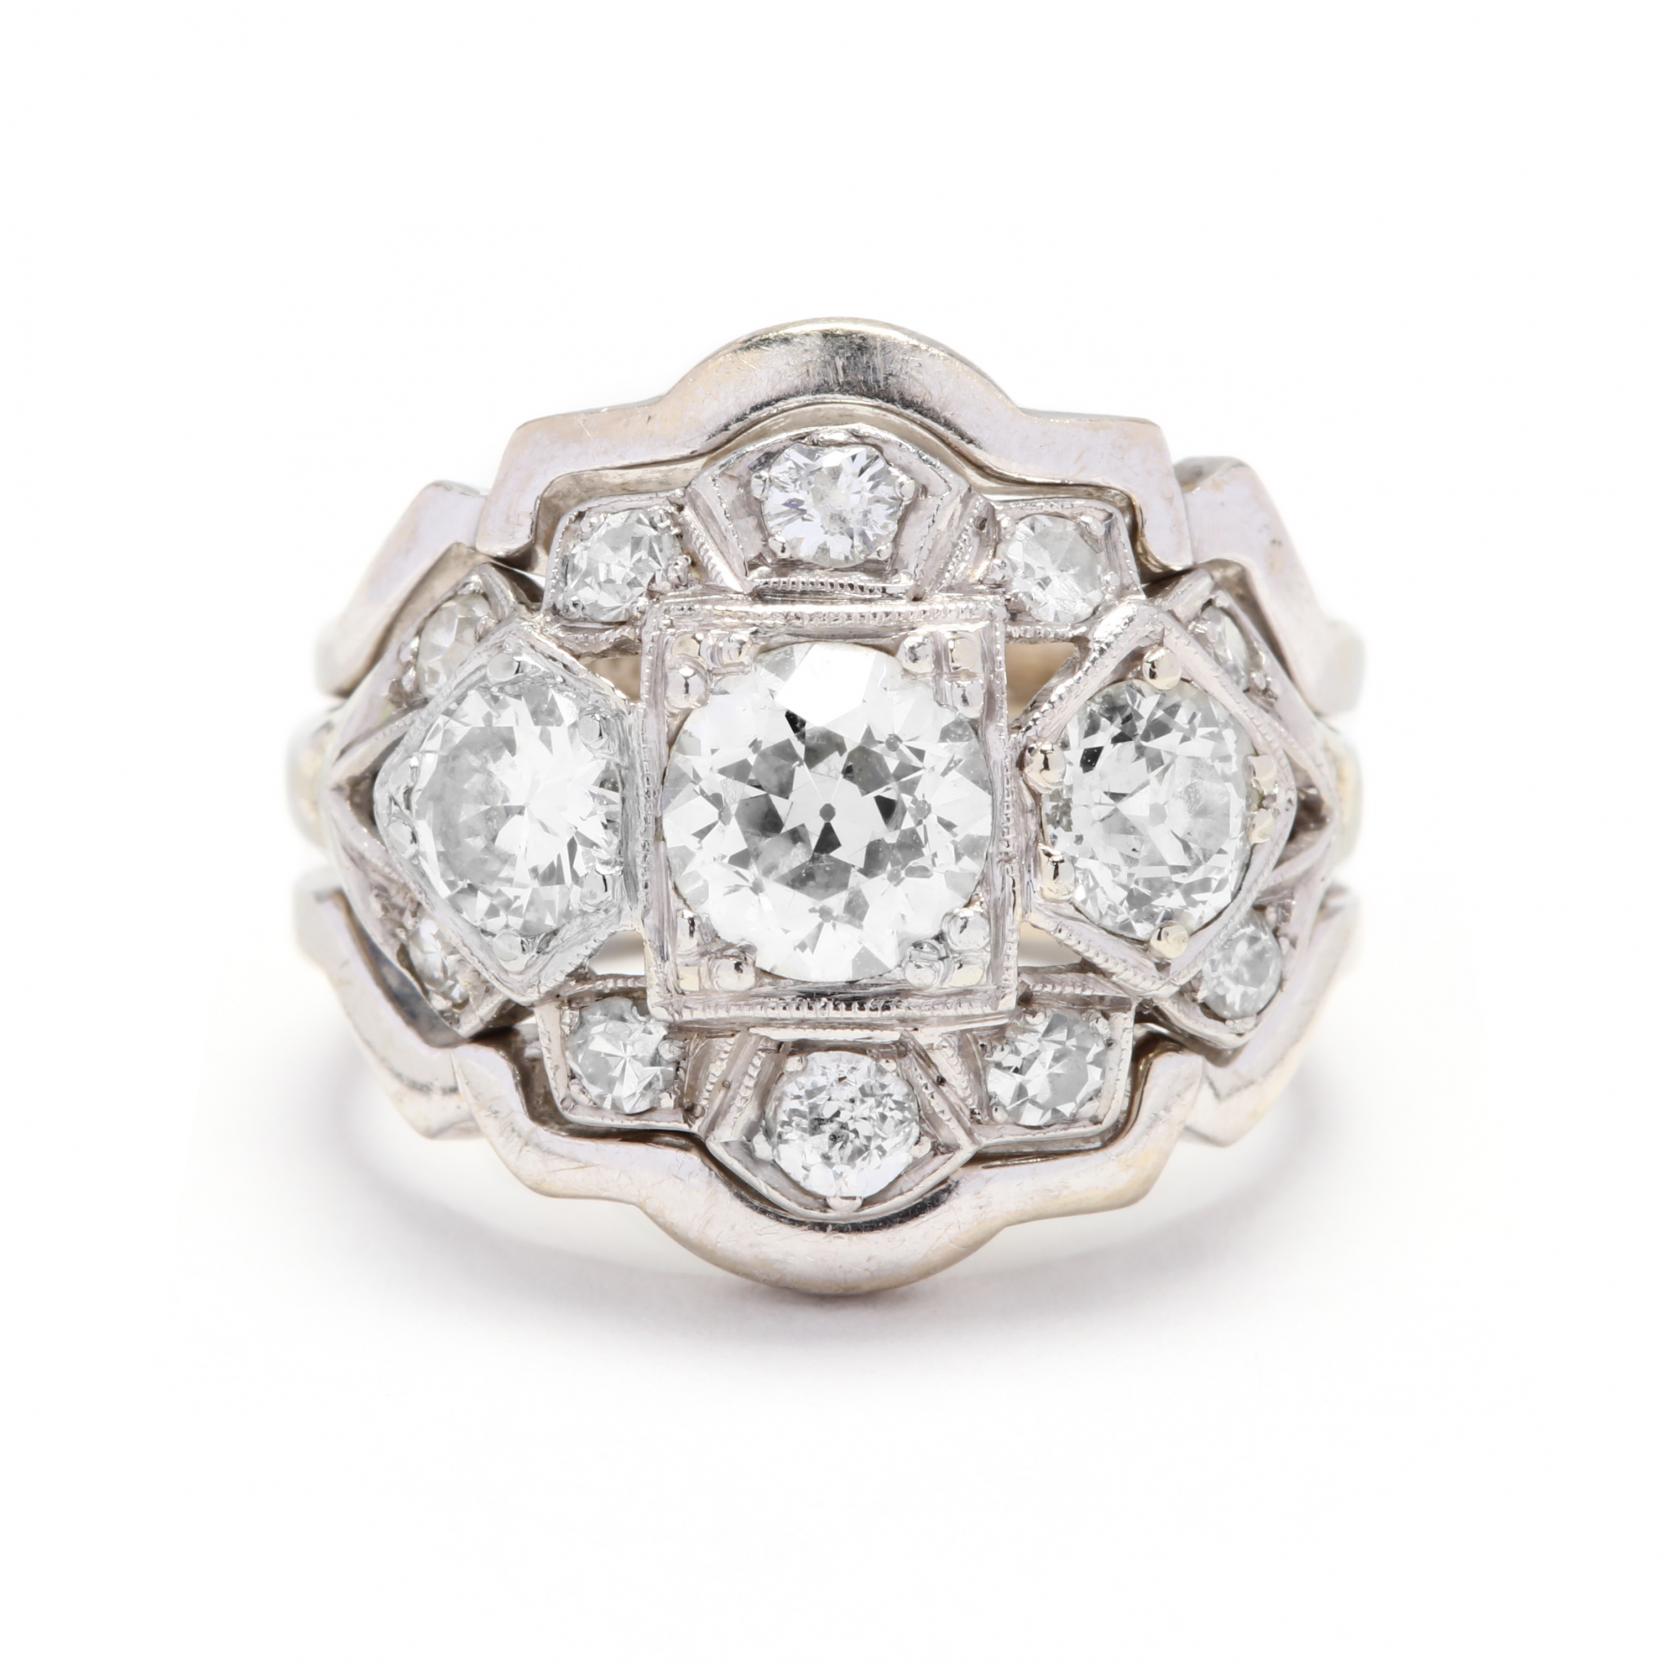 Vintage Platinum and Diamond Ring with 14KT White Gold Jacket - Image 2 of 9